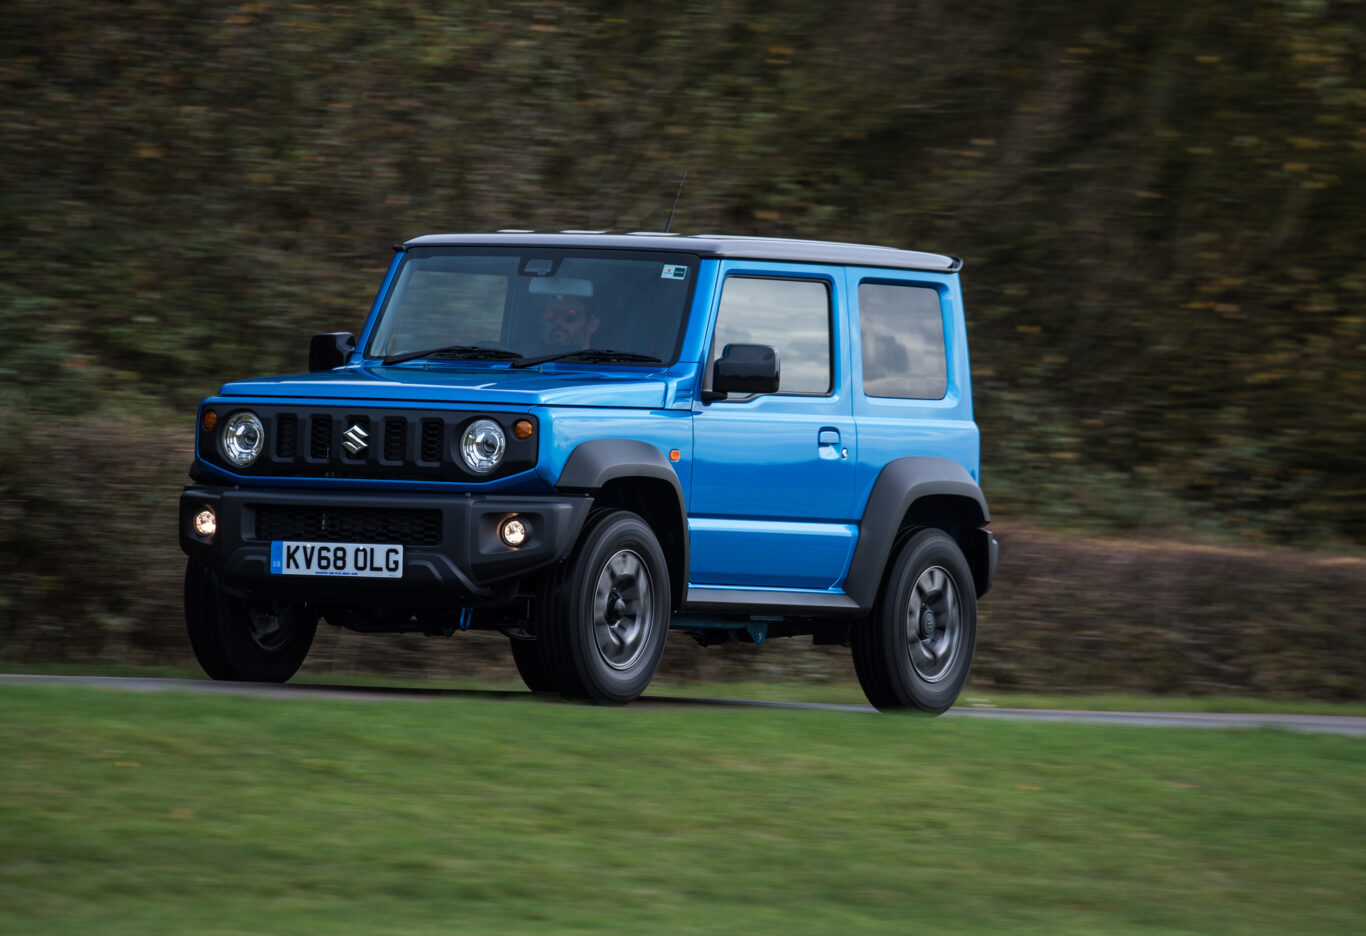 The Jimny is remarkably capable off-road